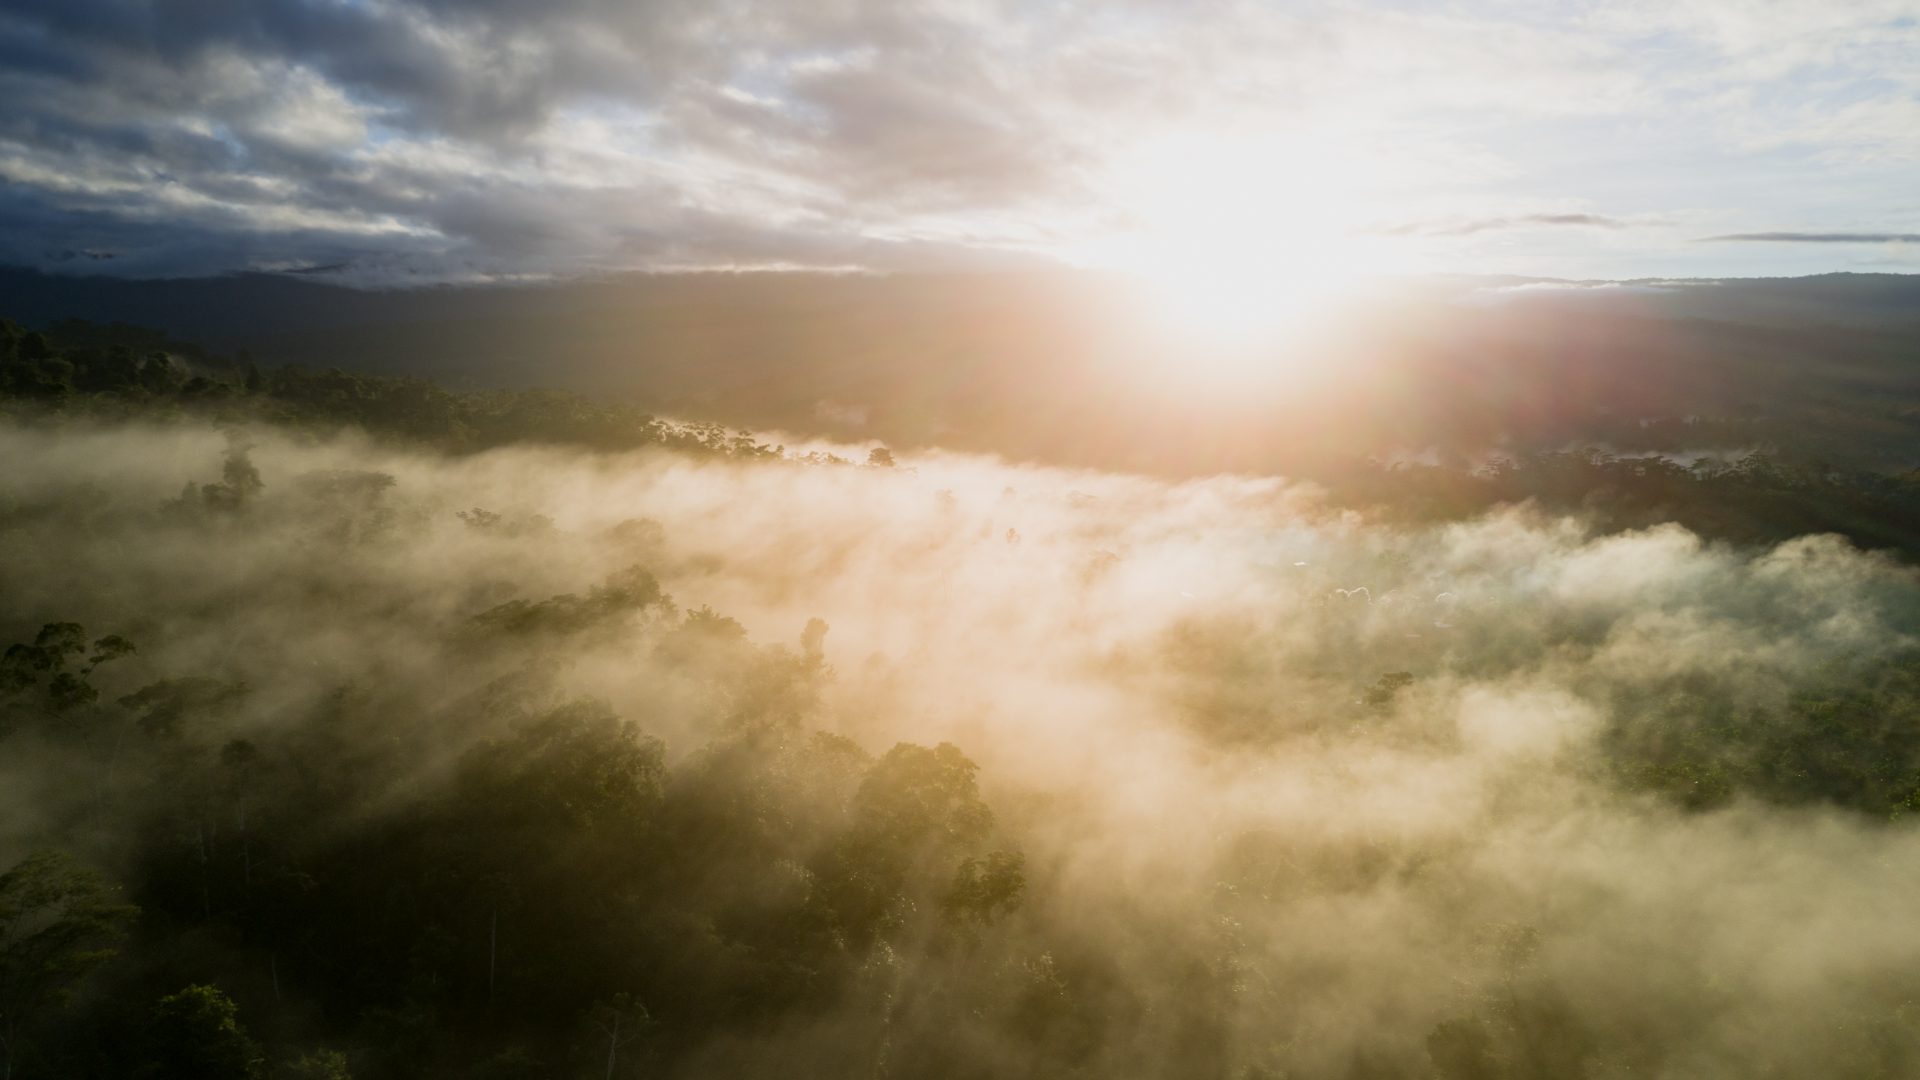 The sun rises over misty Amazonian forest.